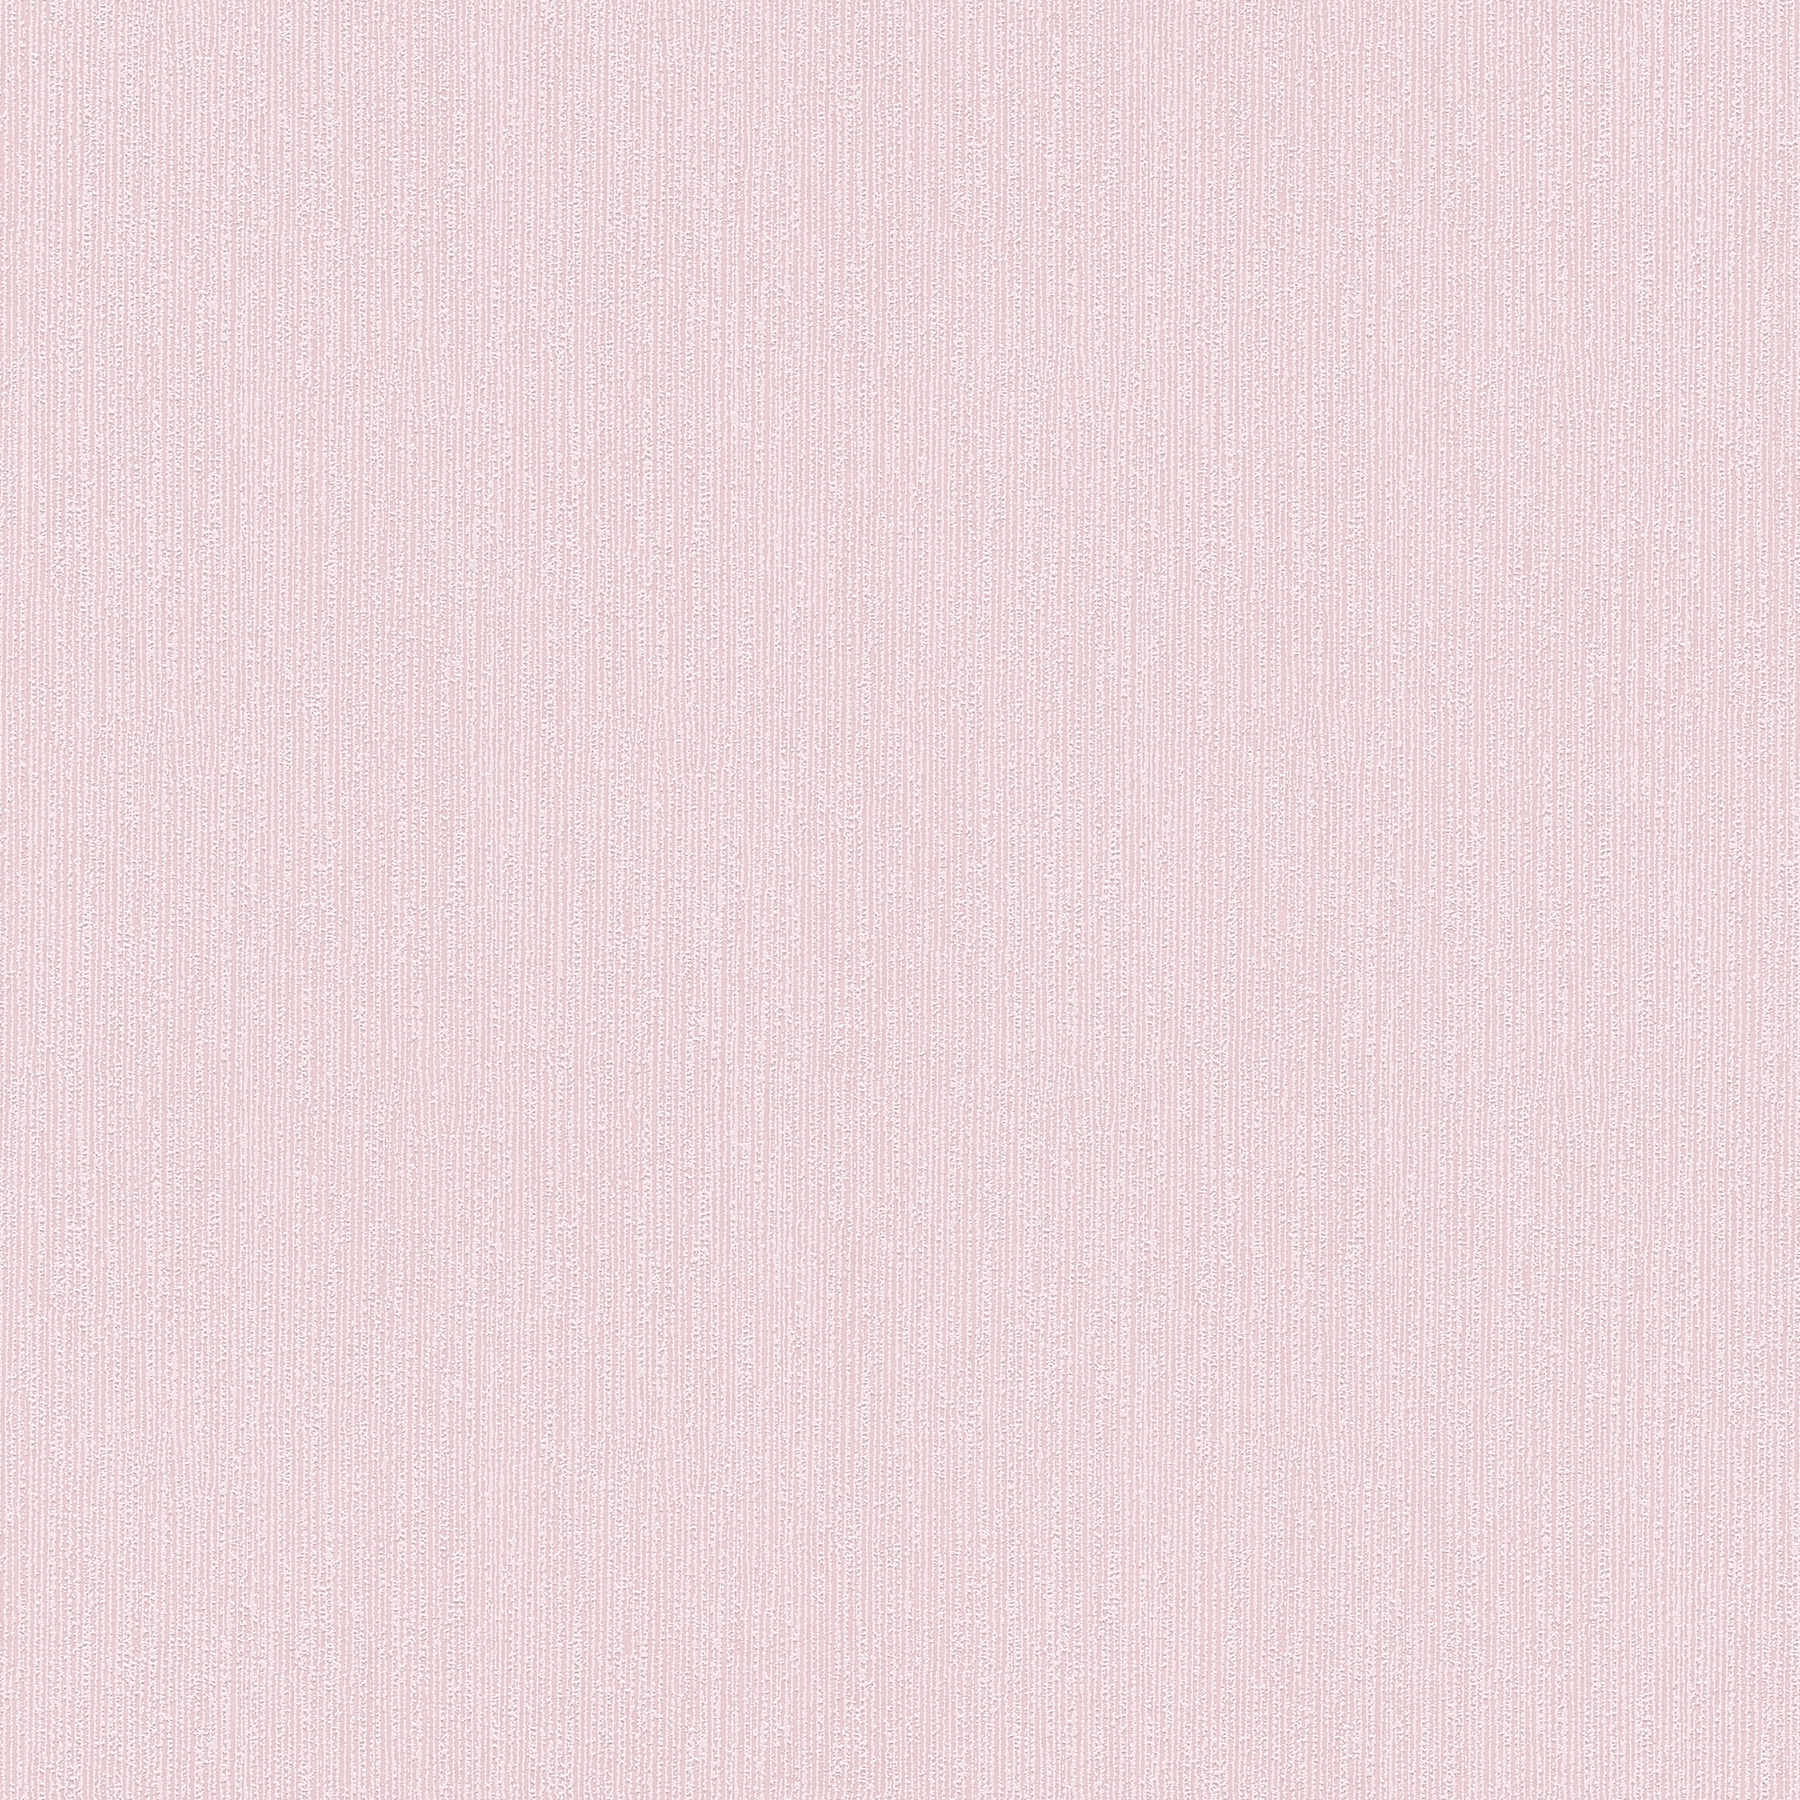 Pastel wallpaper light pink with structure design
